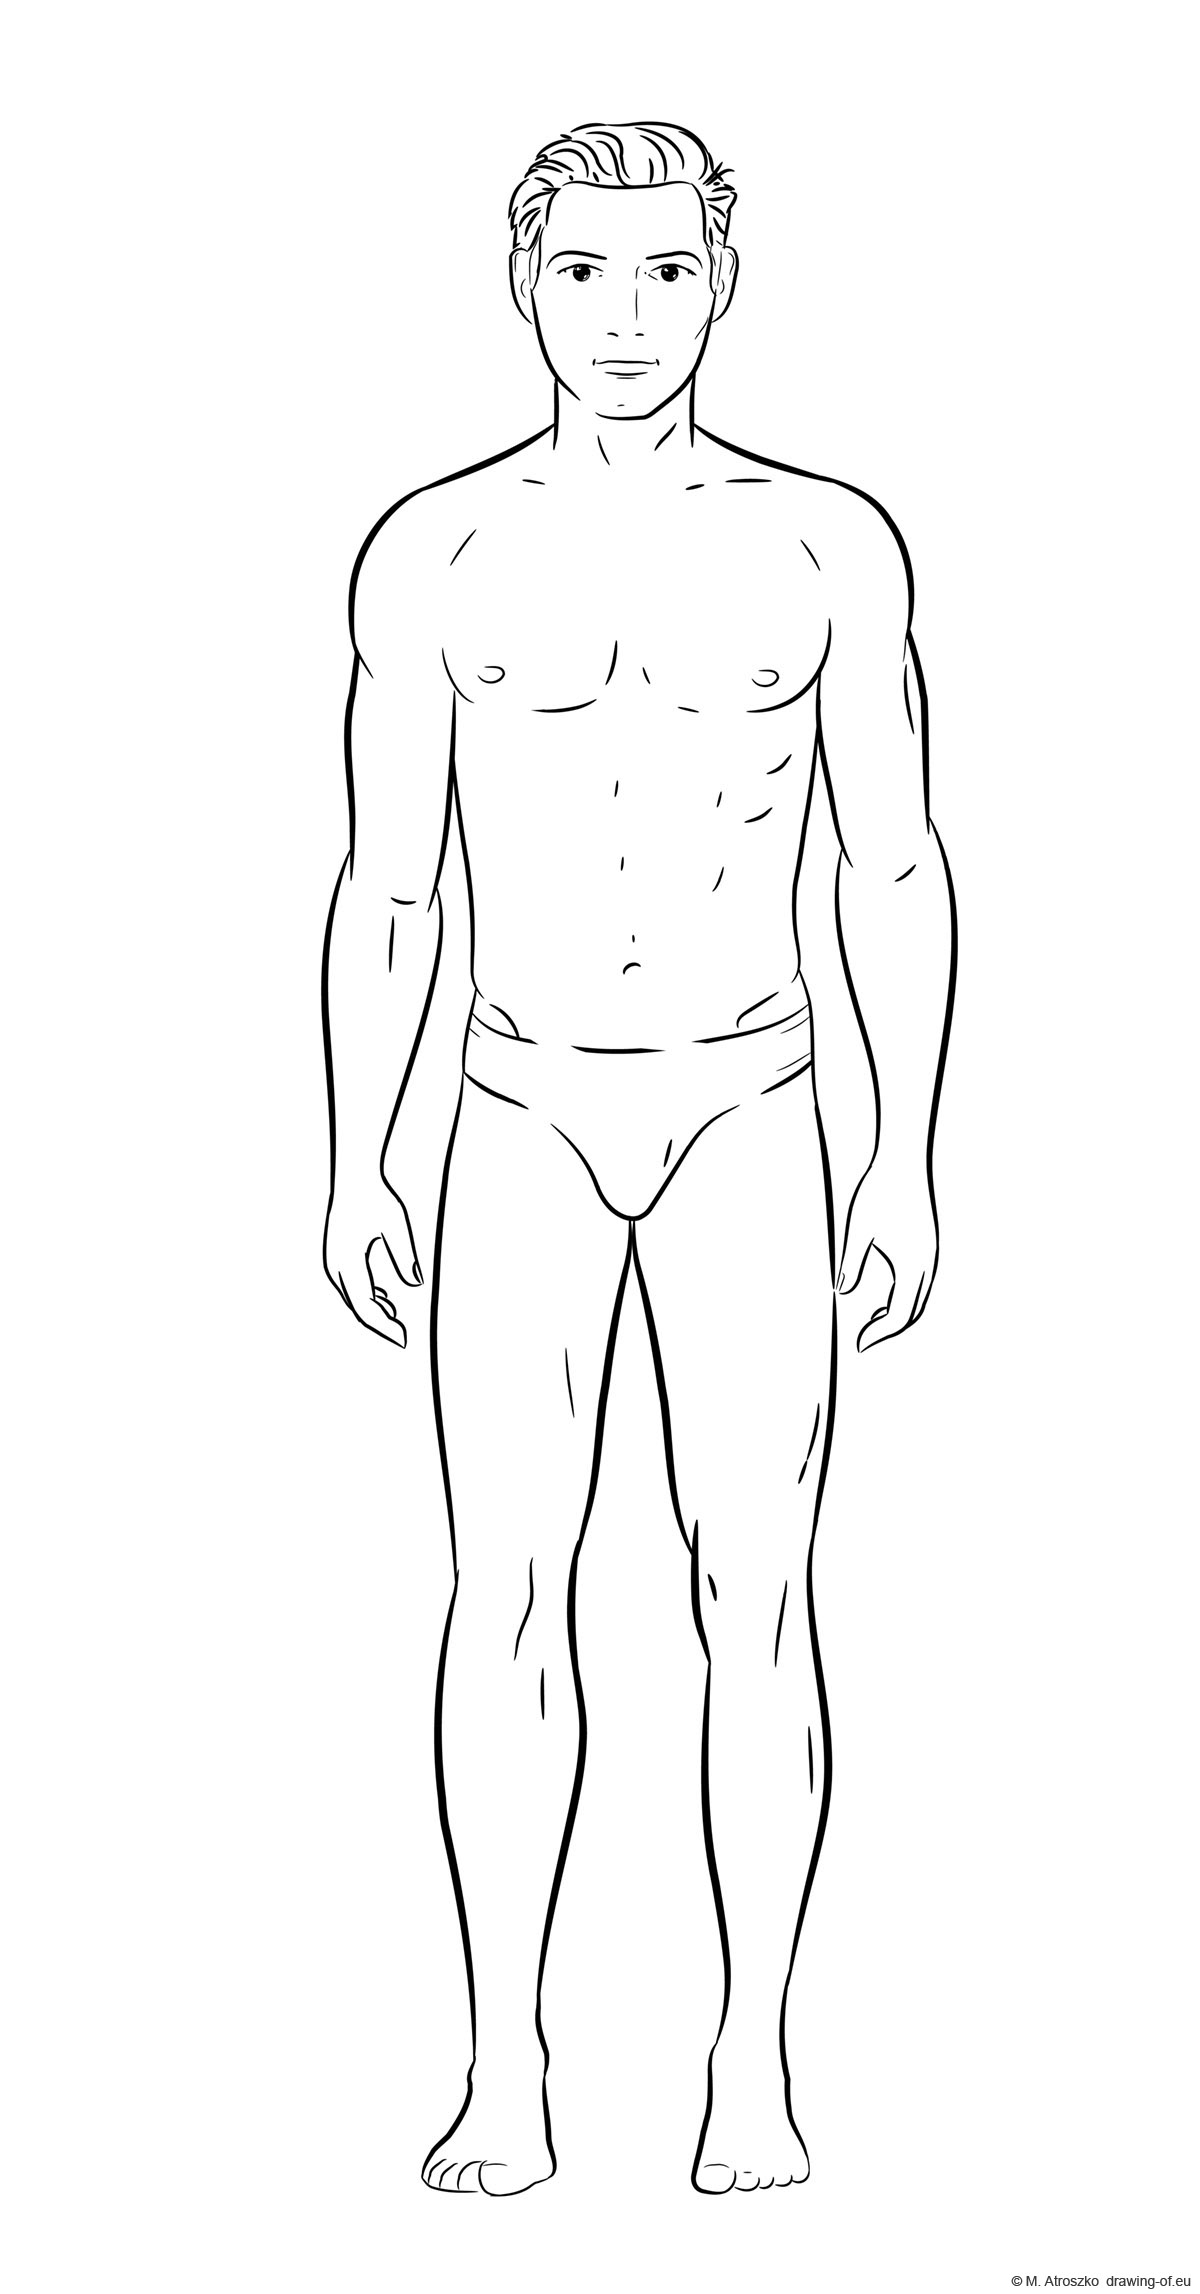 Drawing of a man - body